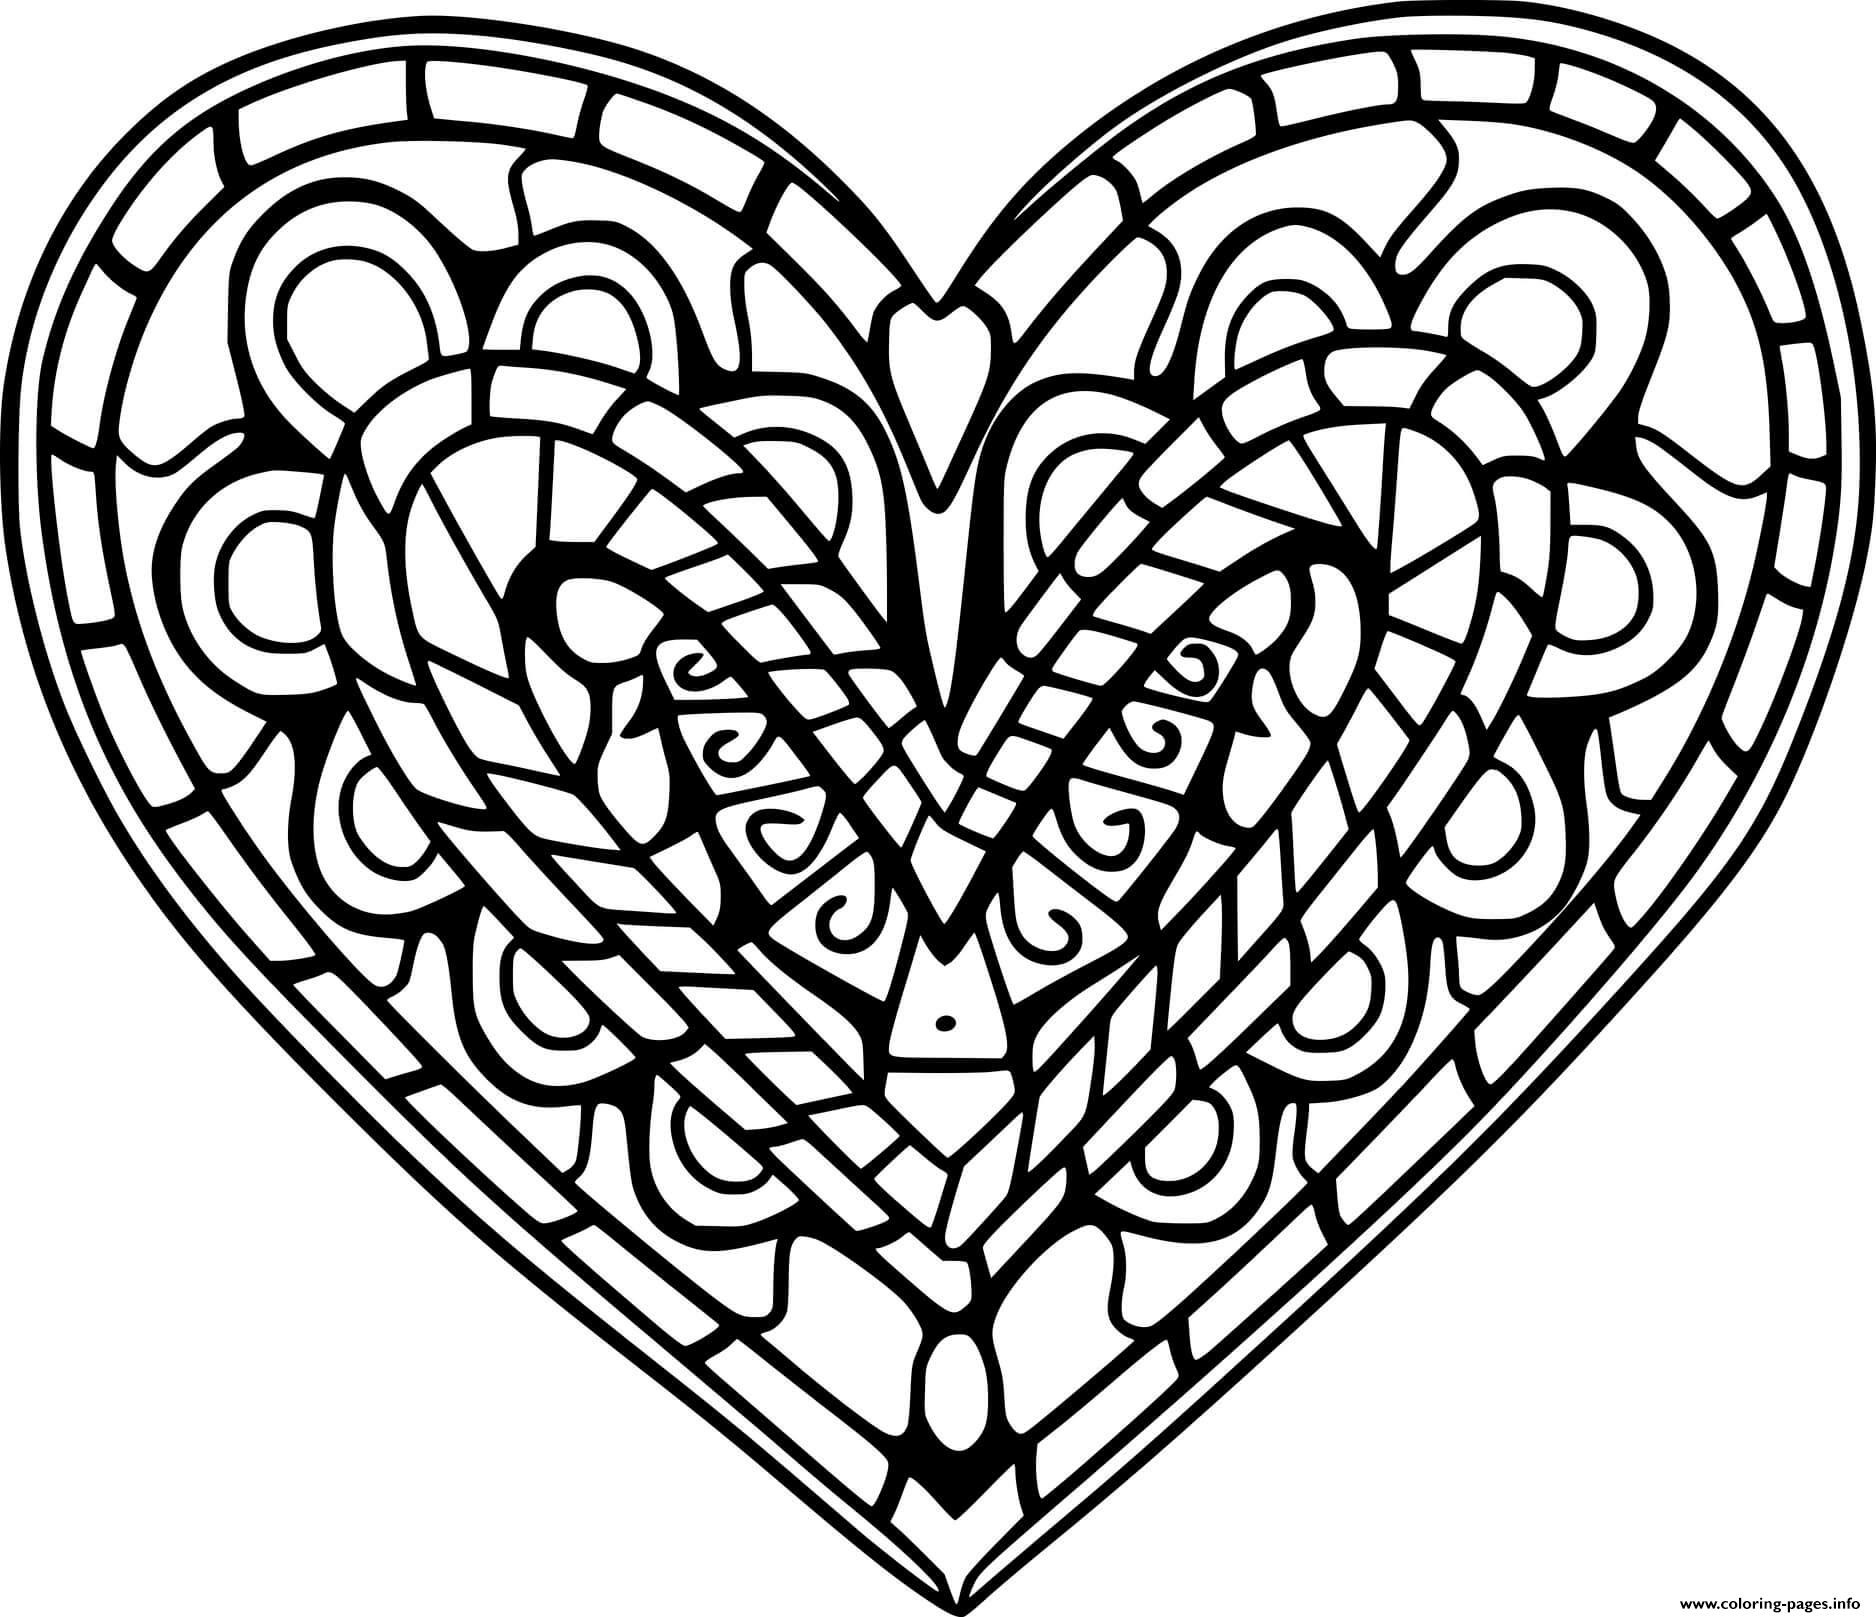 Heart With Various Patterns coloring